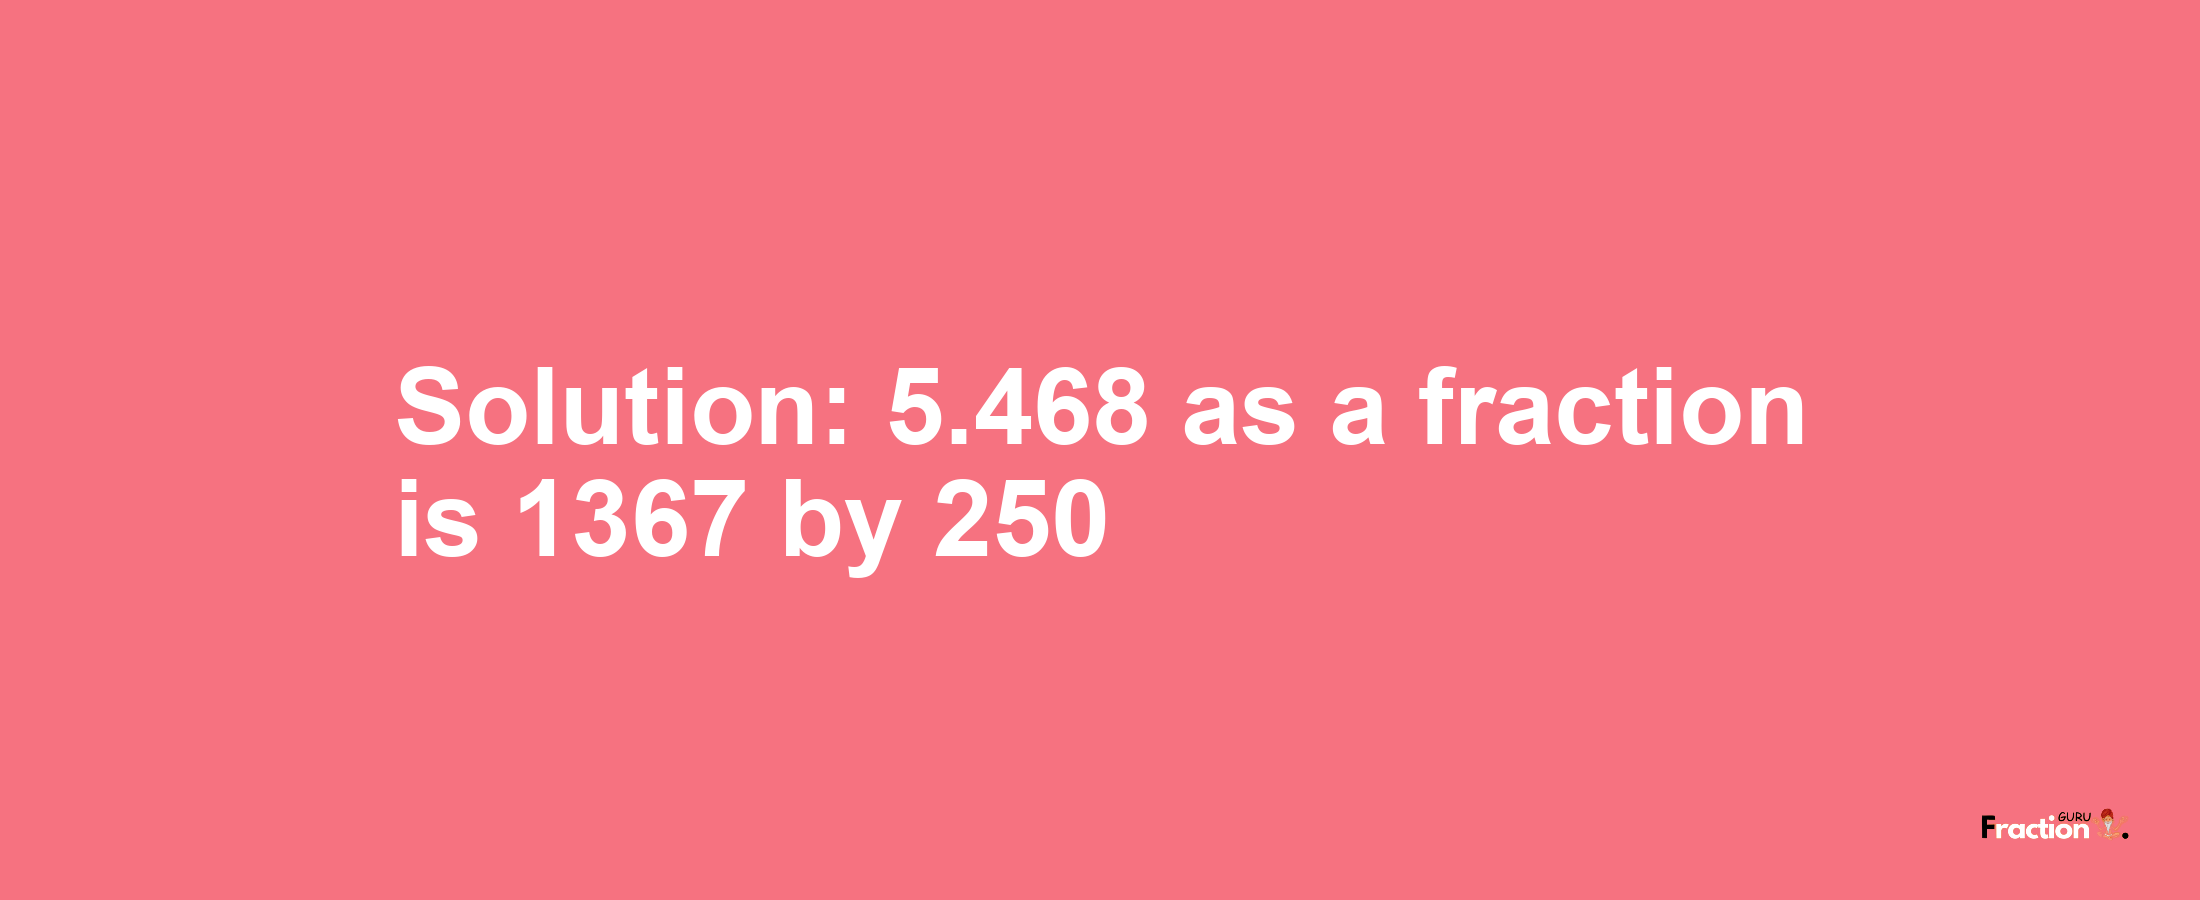 Solution:5.468 as a fraction is 1367/250